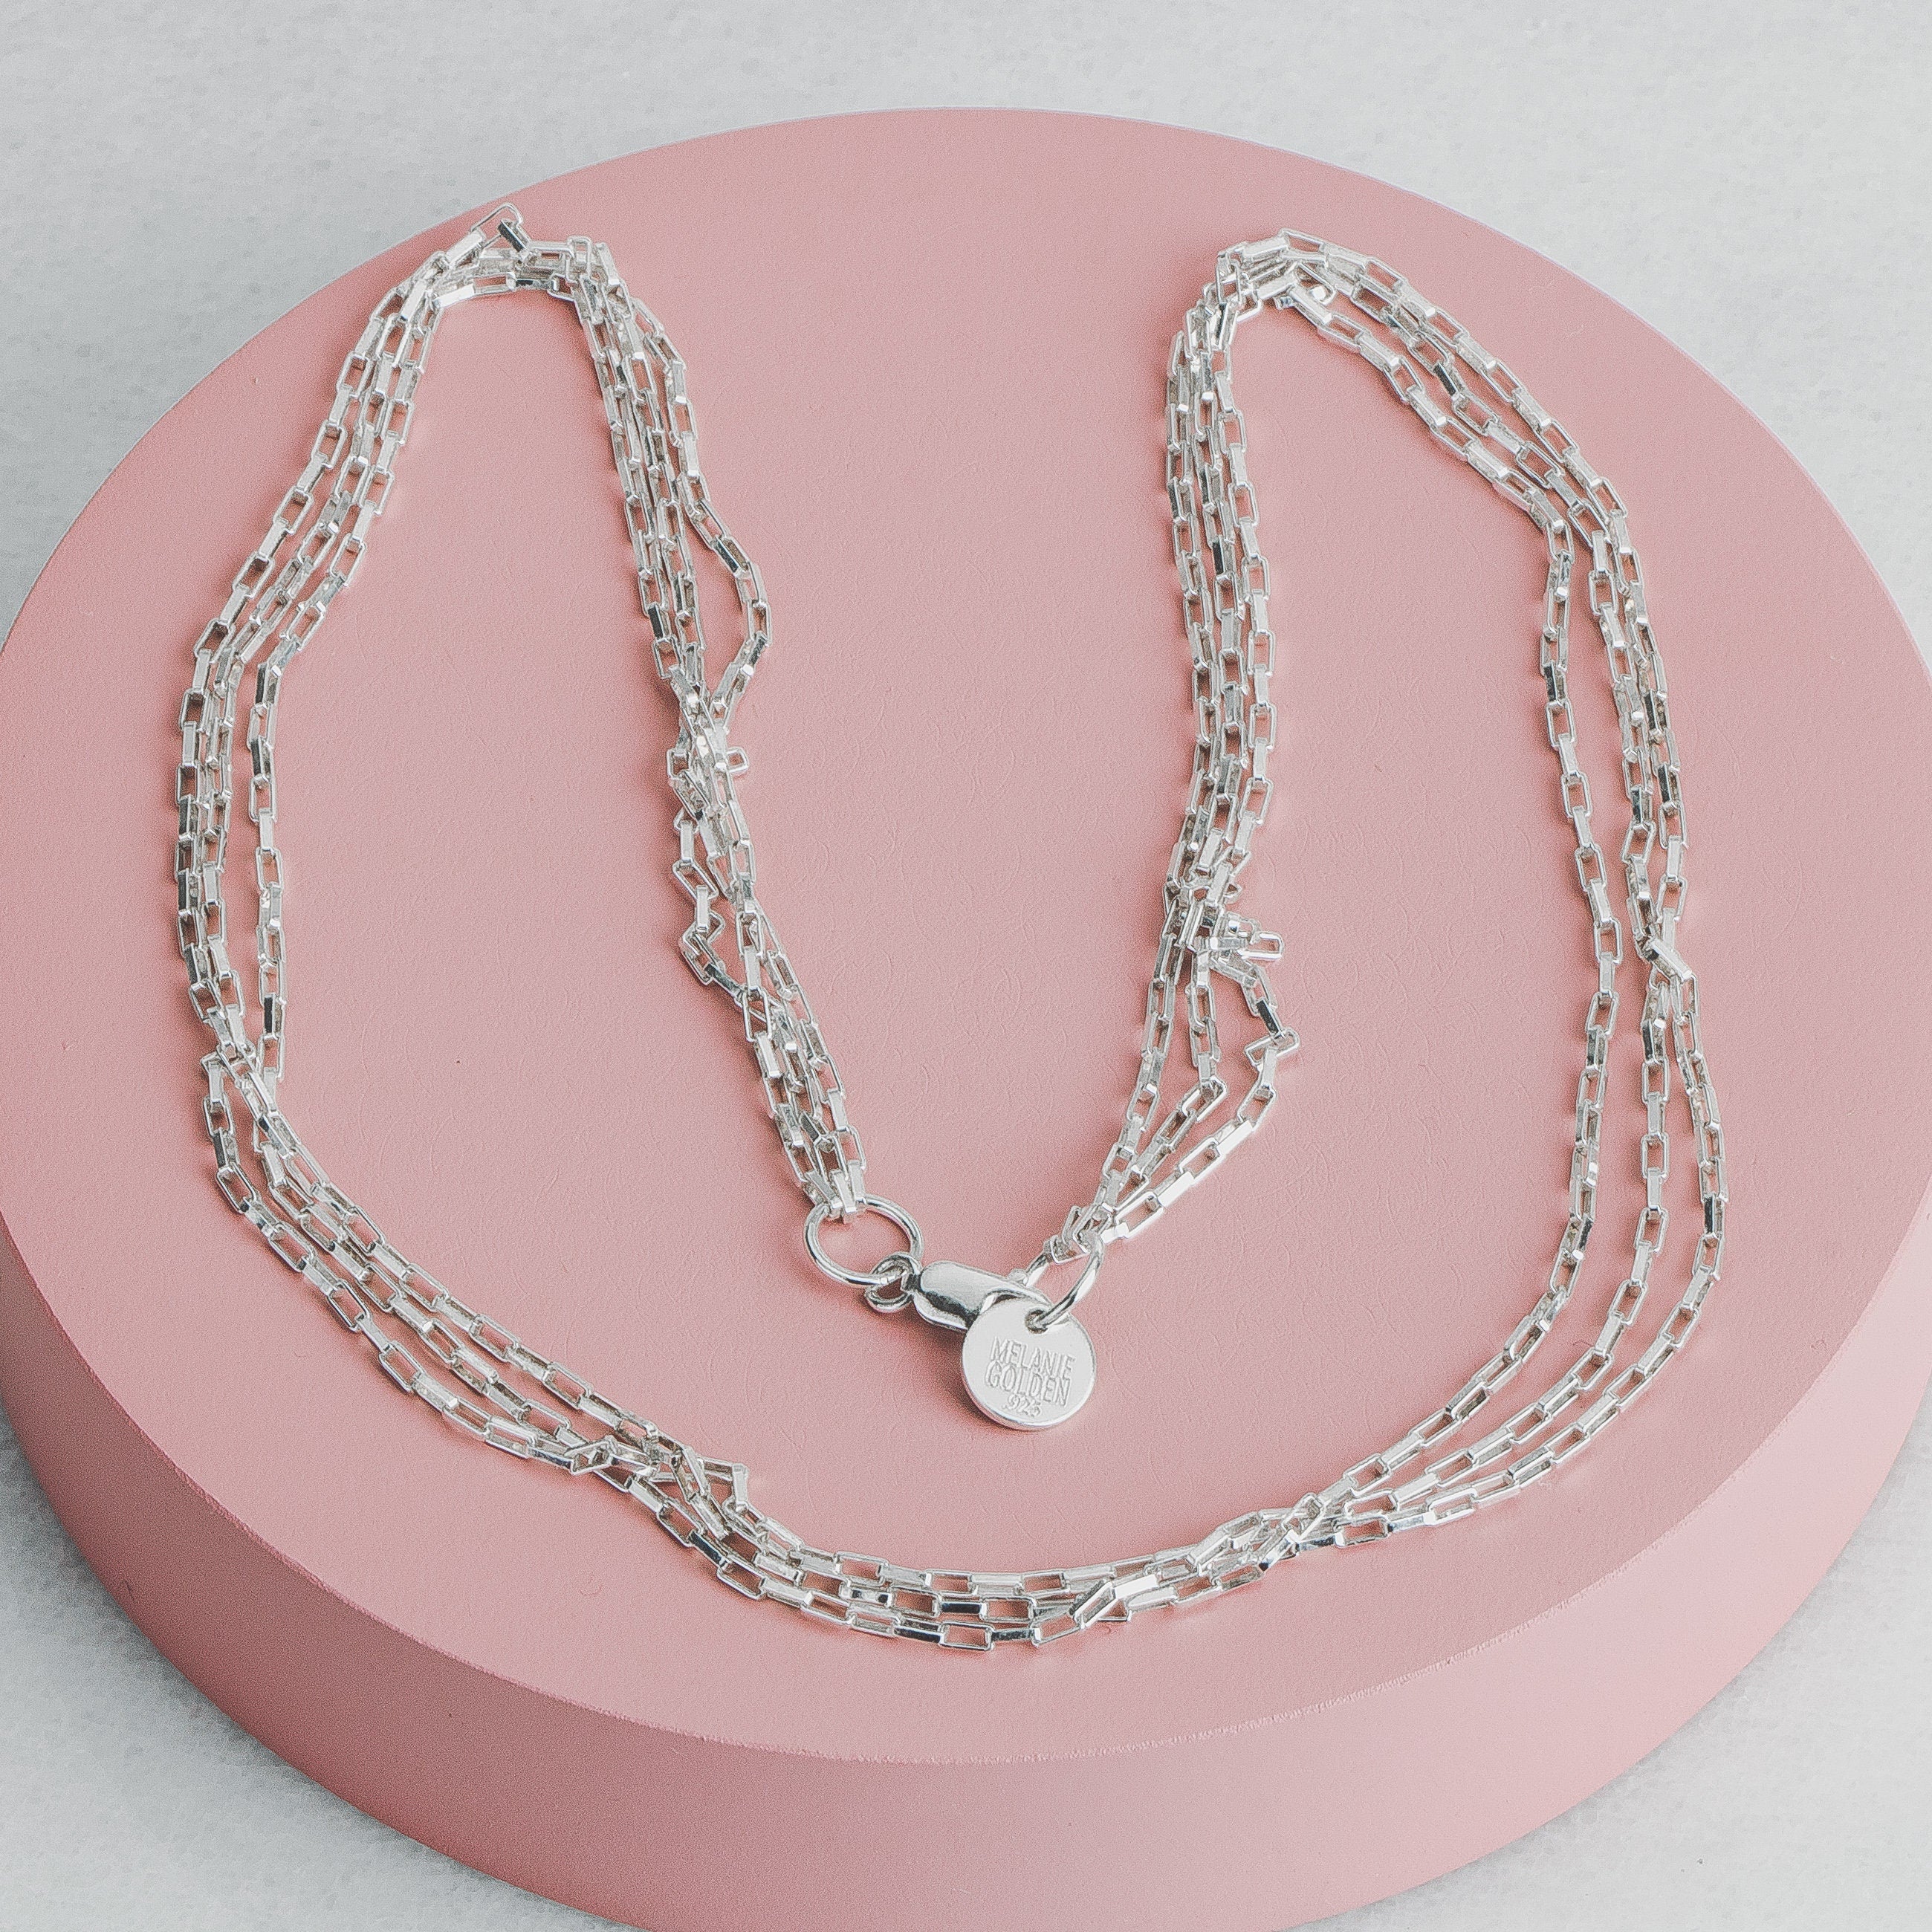 Triple Box Chain Necklace - Melanie Golden Jewelry - _badge_NEW, chain necklaces, essential chains, everyday, necklaces, New